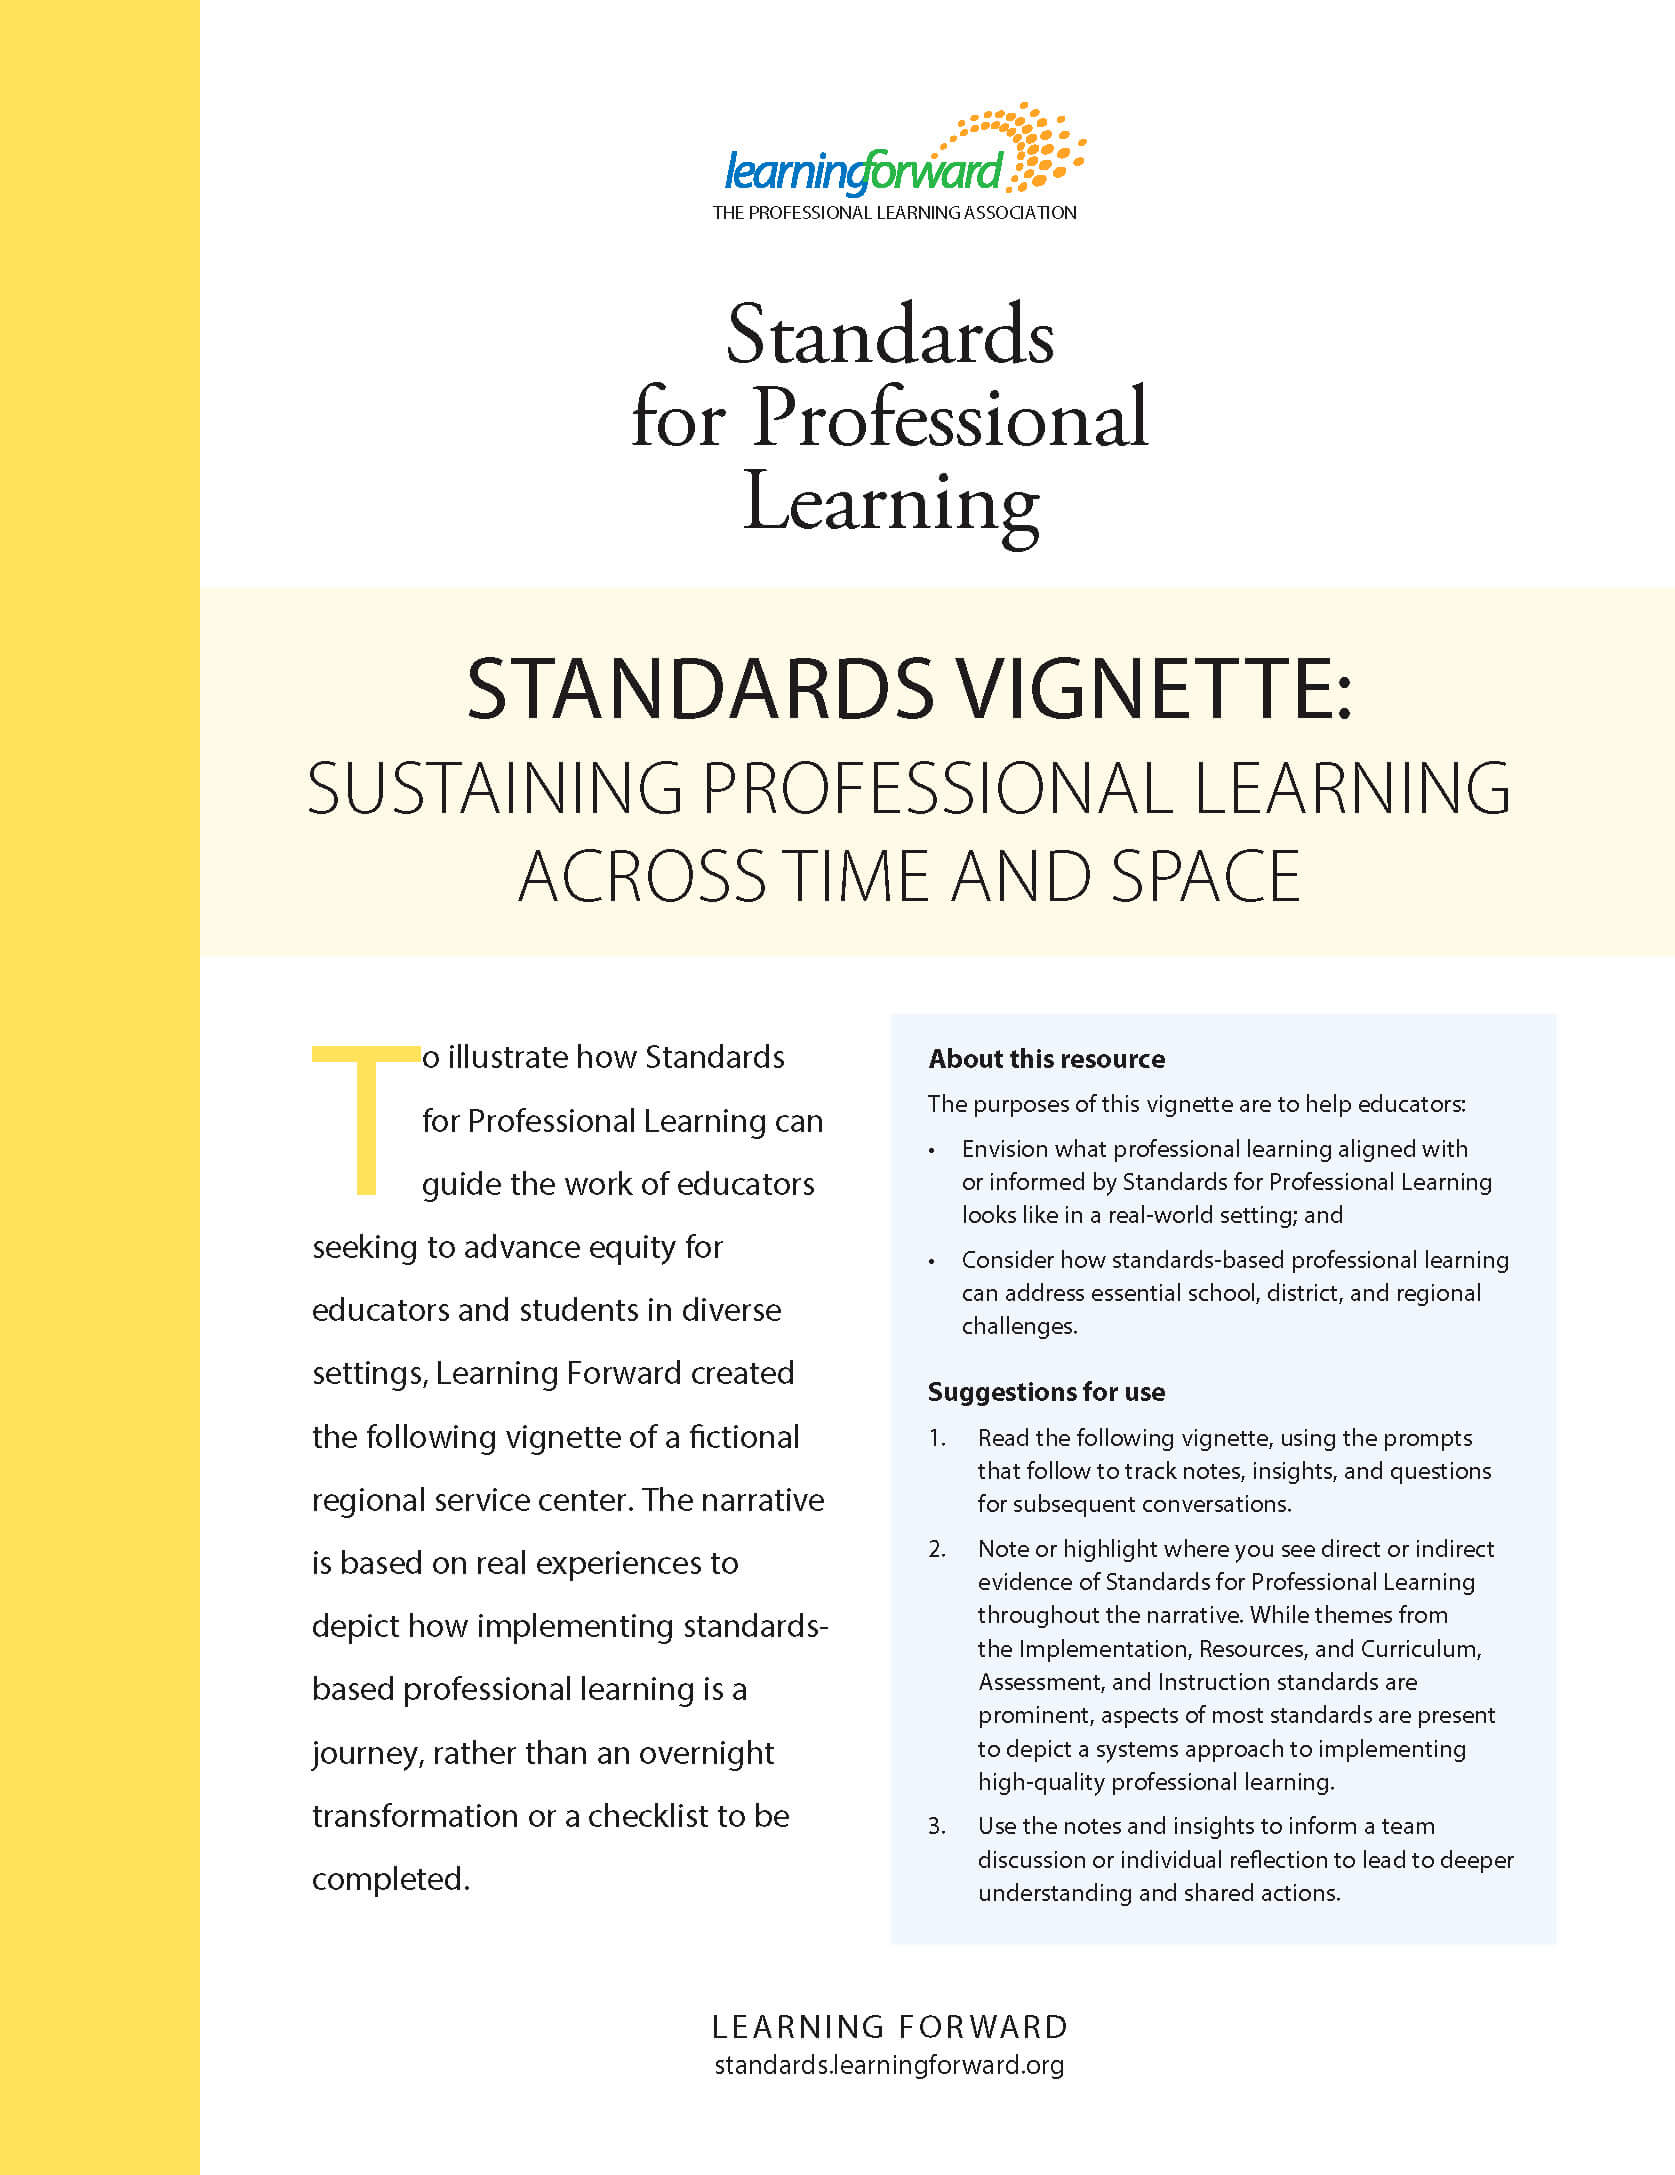 COVER from STANDARDS VIGNETTE: SUSTAINING PROFESSIONAL LEARNING ACROSS TIME AND SPACE